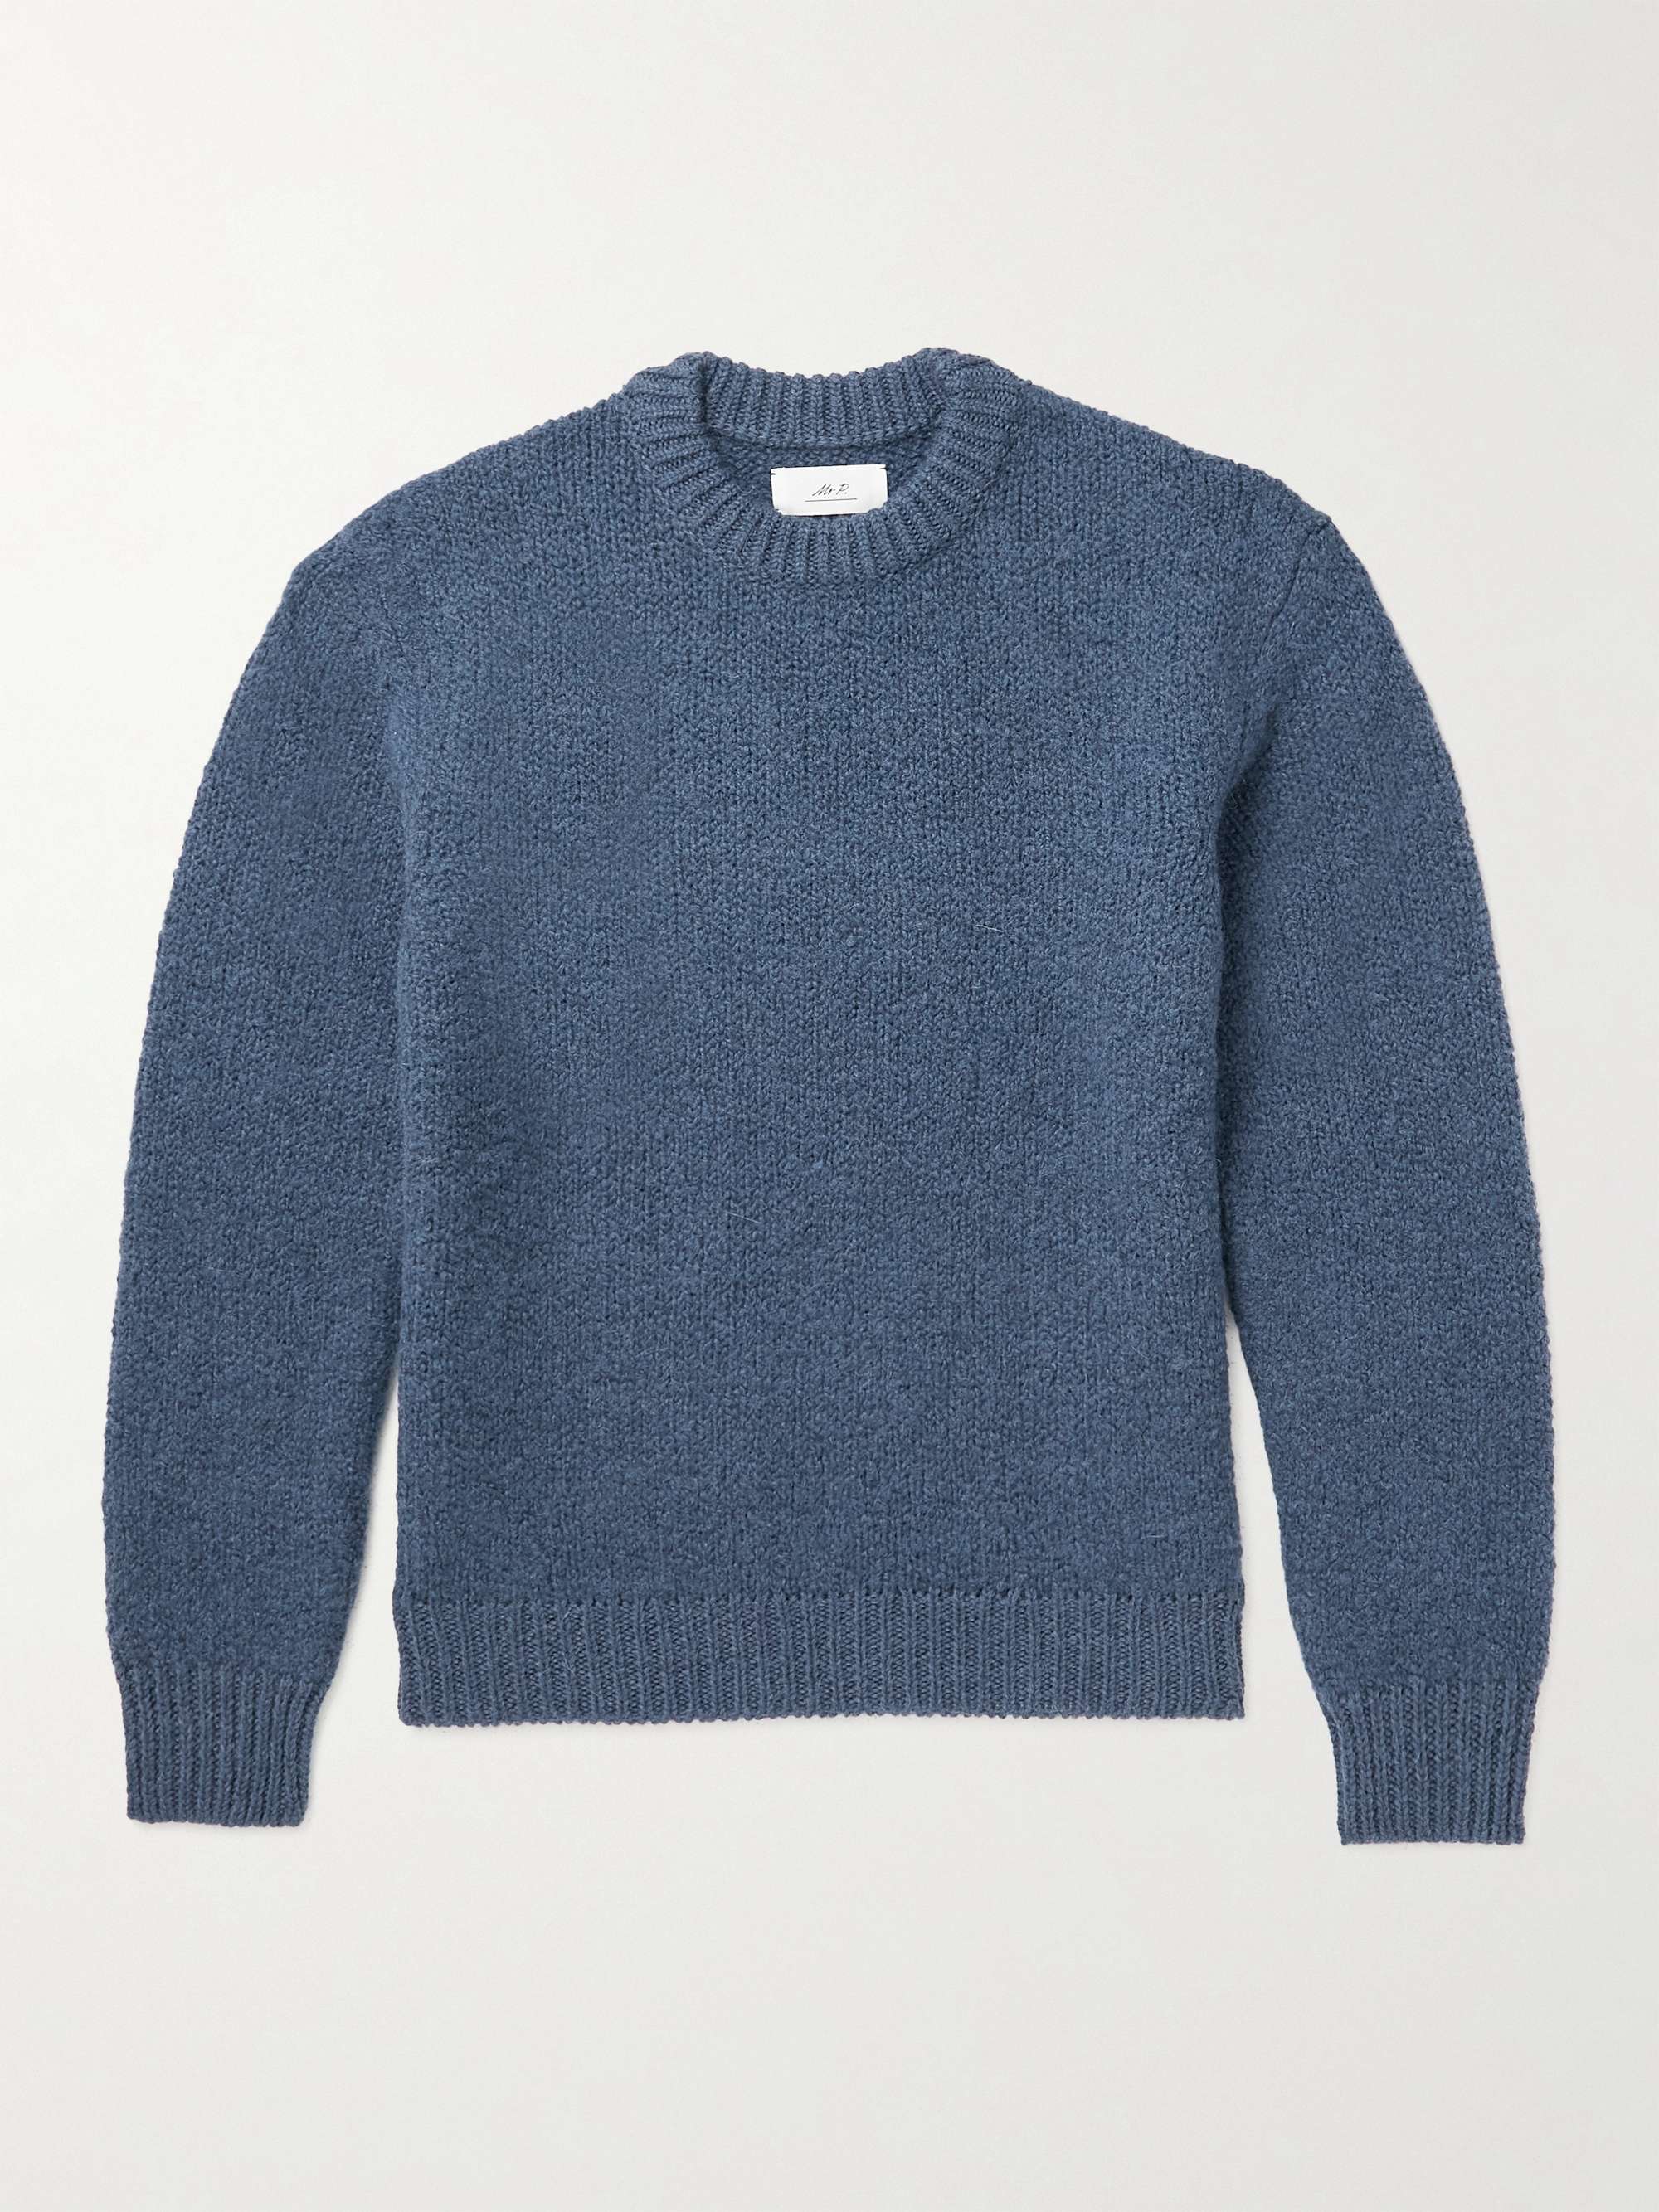 Blue Ribbed Wool and Alpaca-Blend Sweater | MR P. | MR PORTER